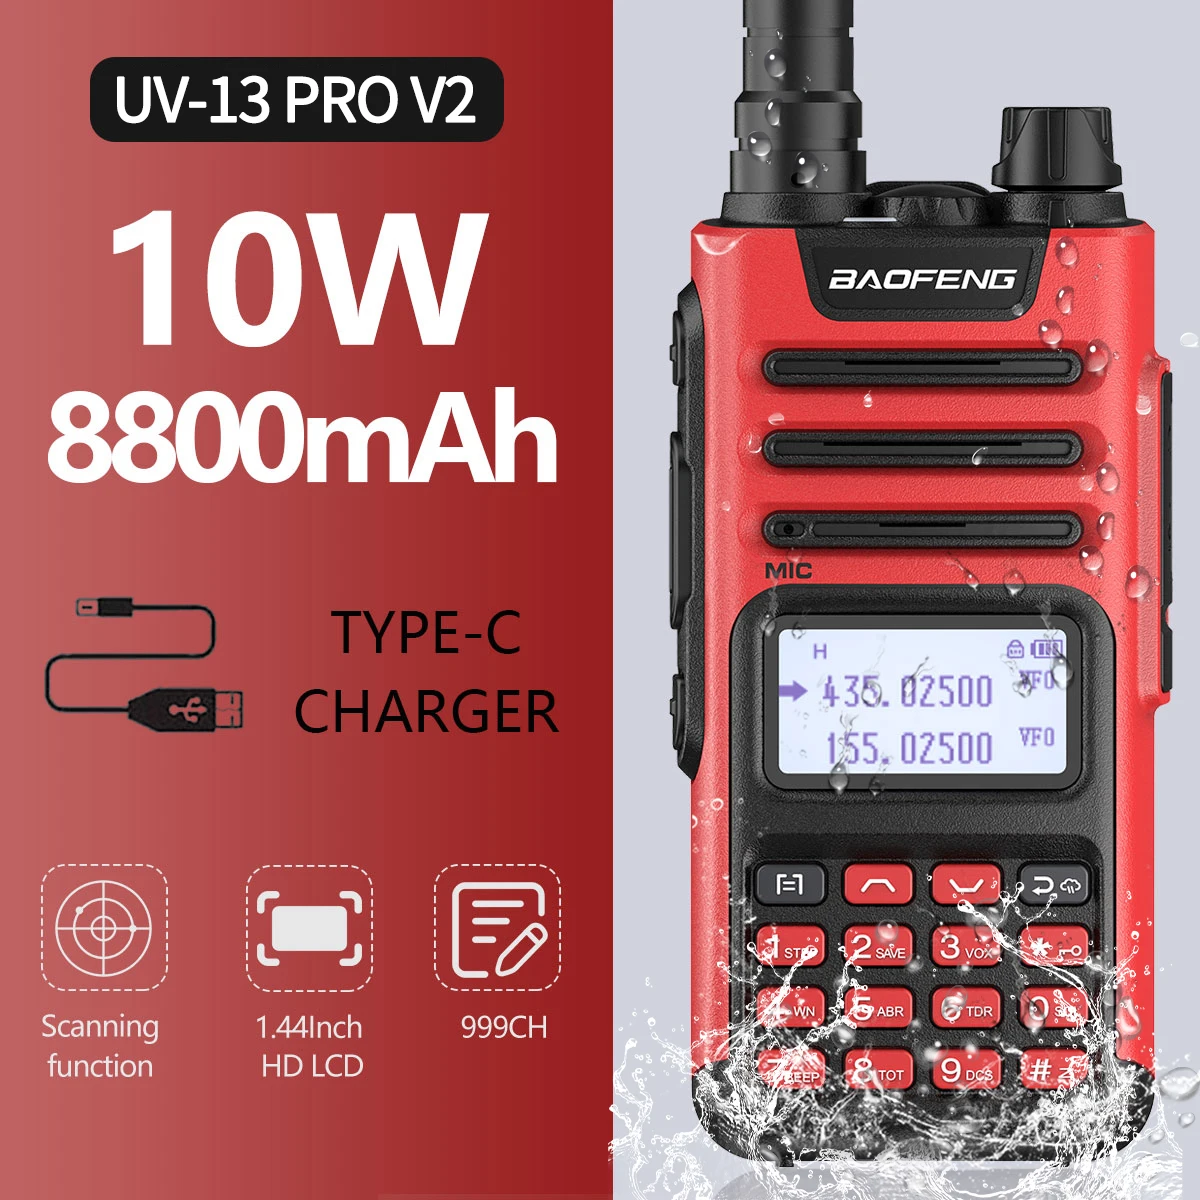 Baofeng UV-13 PRO V2 High Power Waterproof Walkie Talkie VHF UHF  136-174/400-520MHz Transceiver Add USB Charger Two Way Radio AliExpress